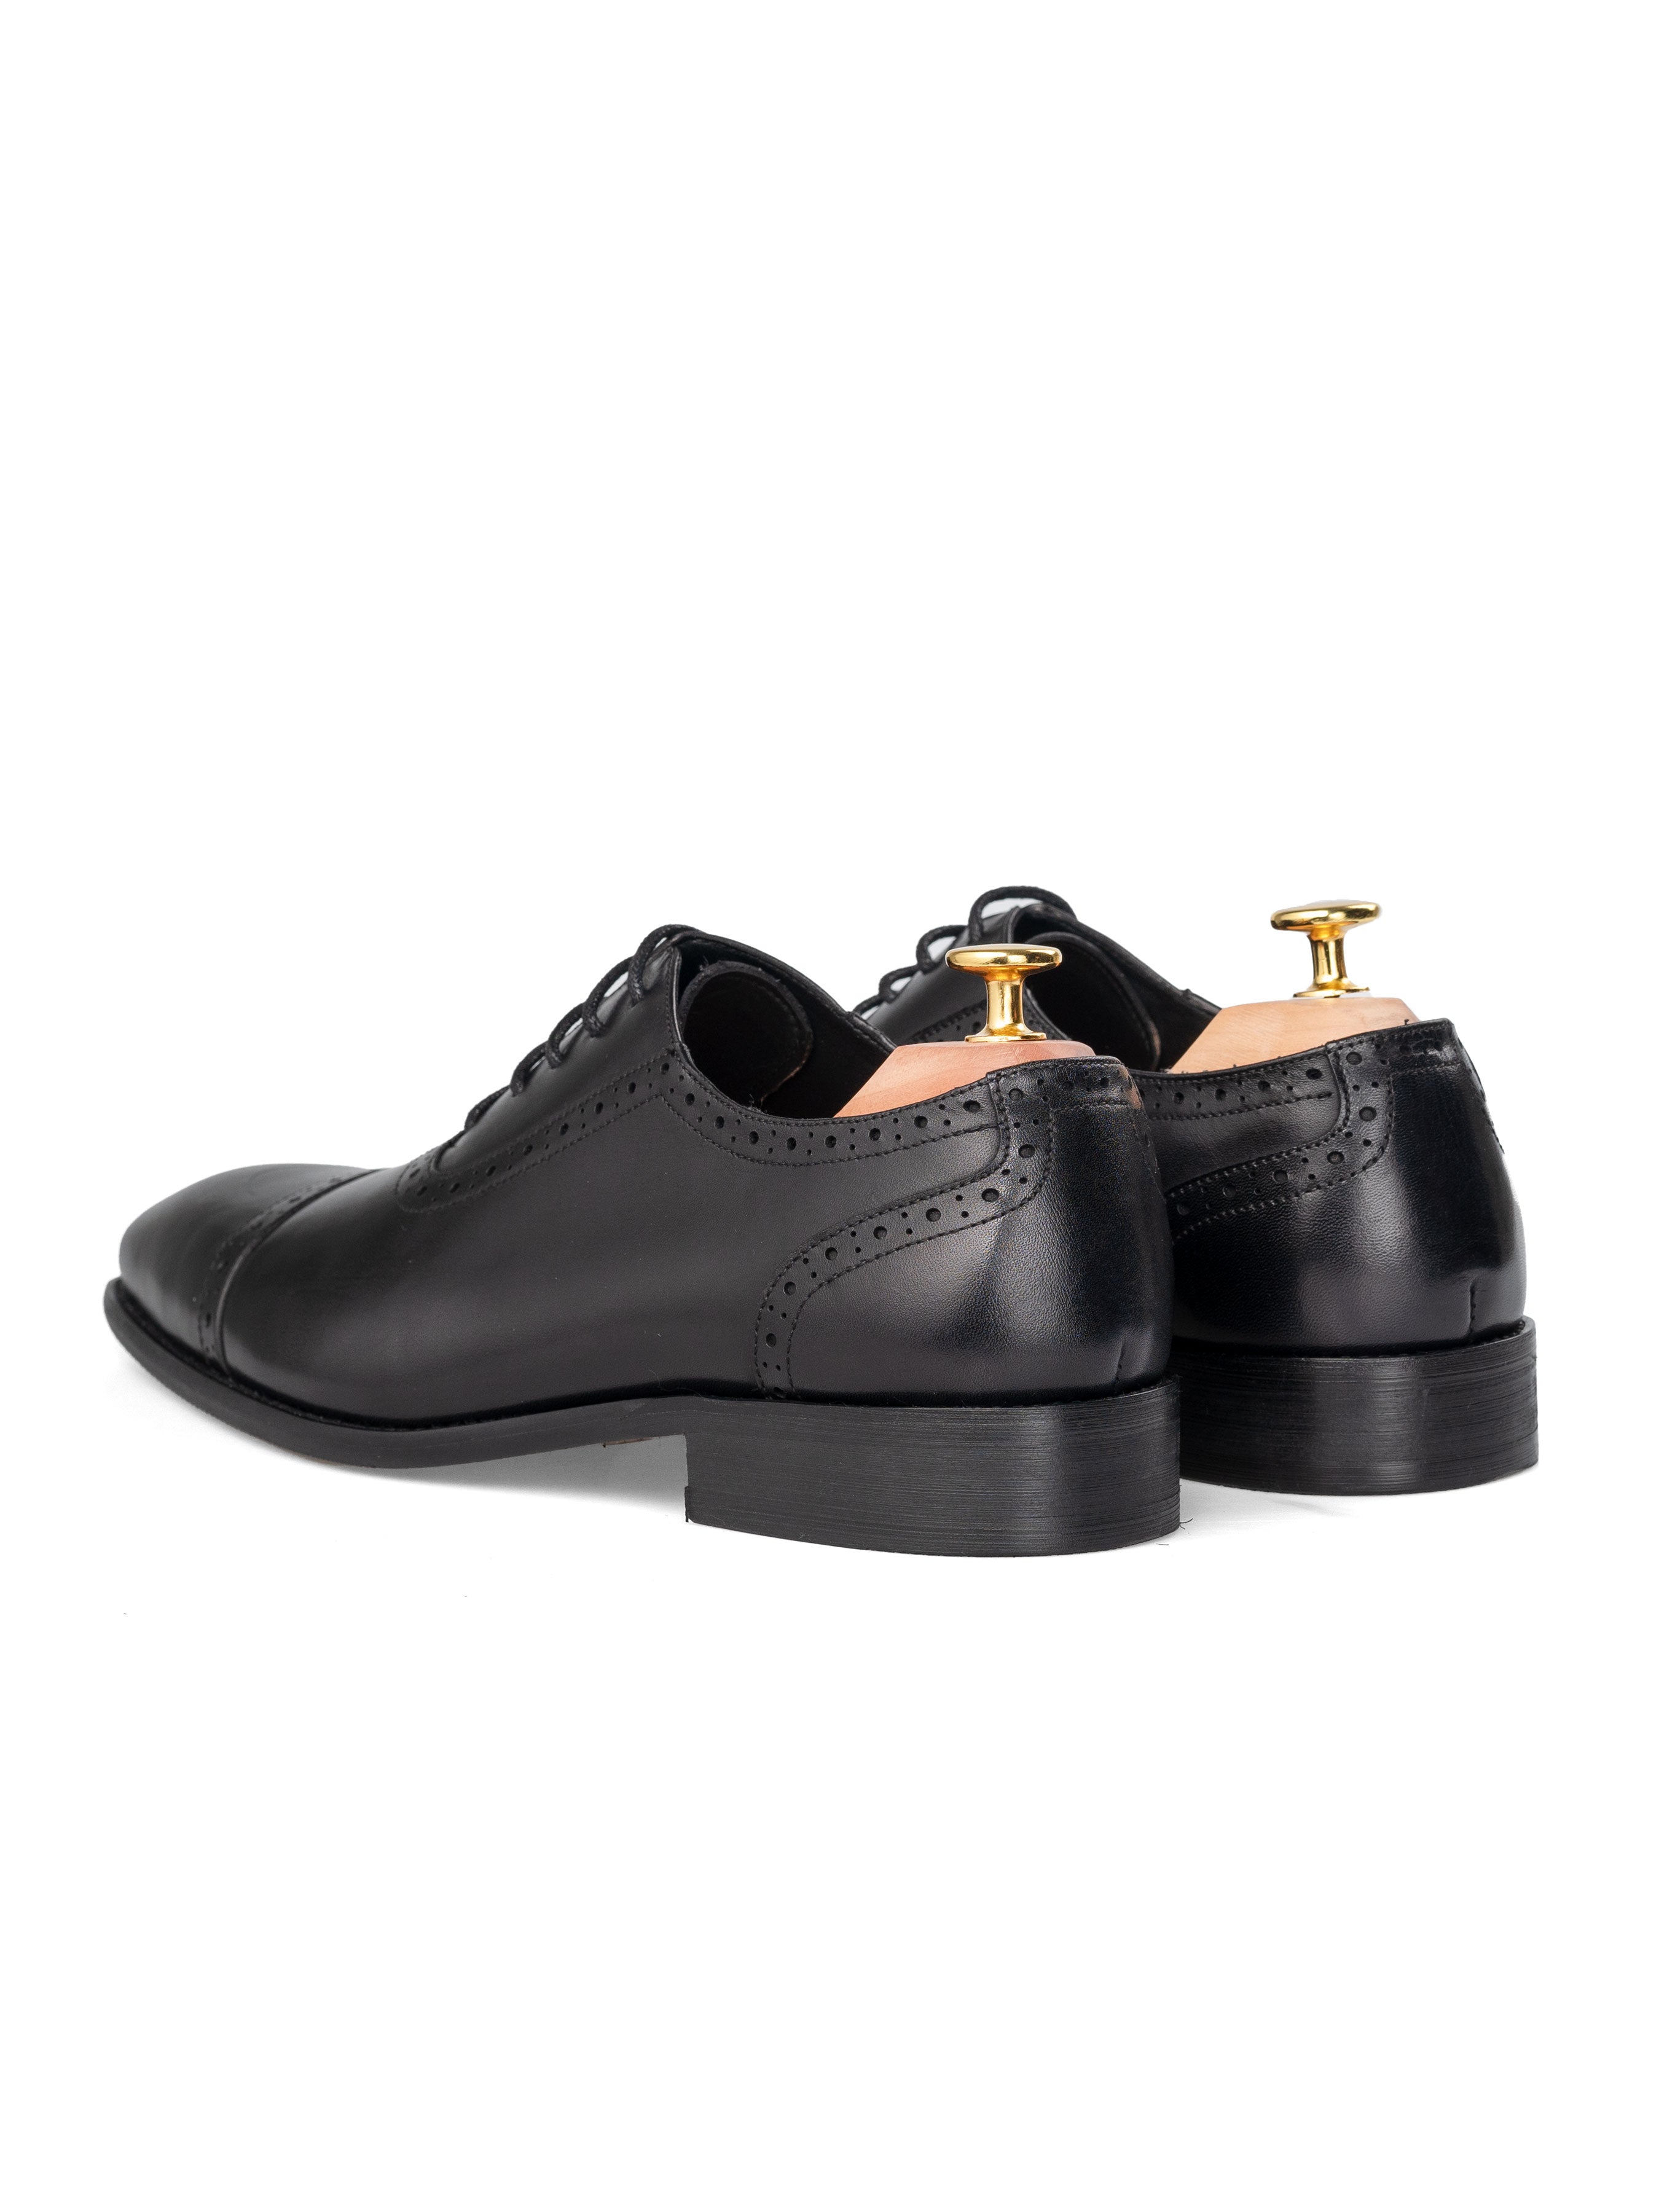 Oxford Cap Toe Adelaide - Black Lace Up (Chisel Toe)